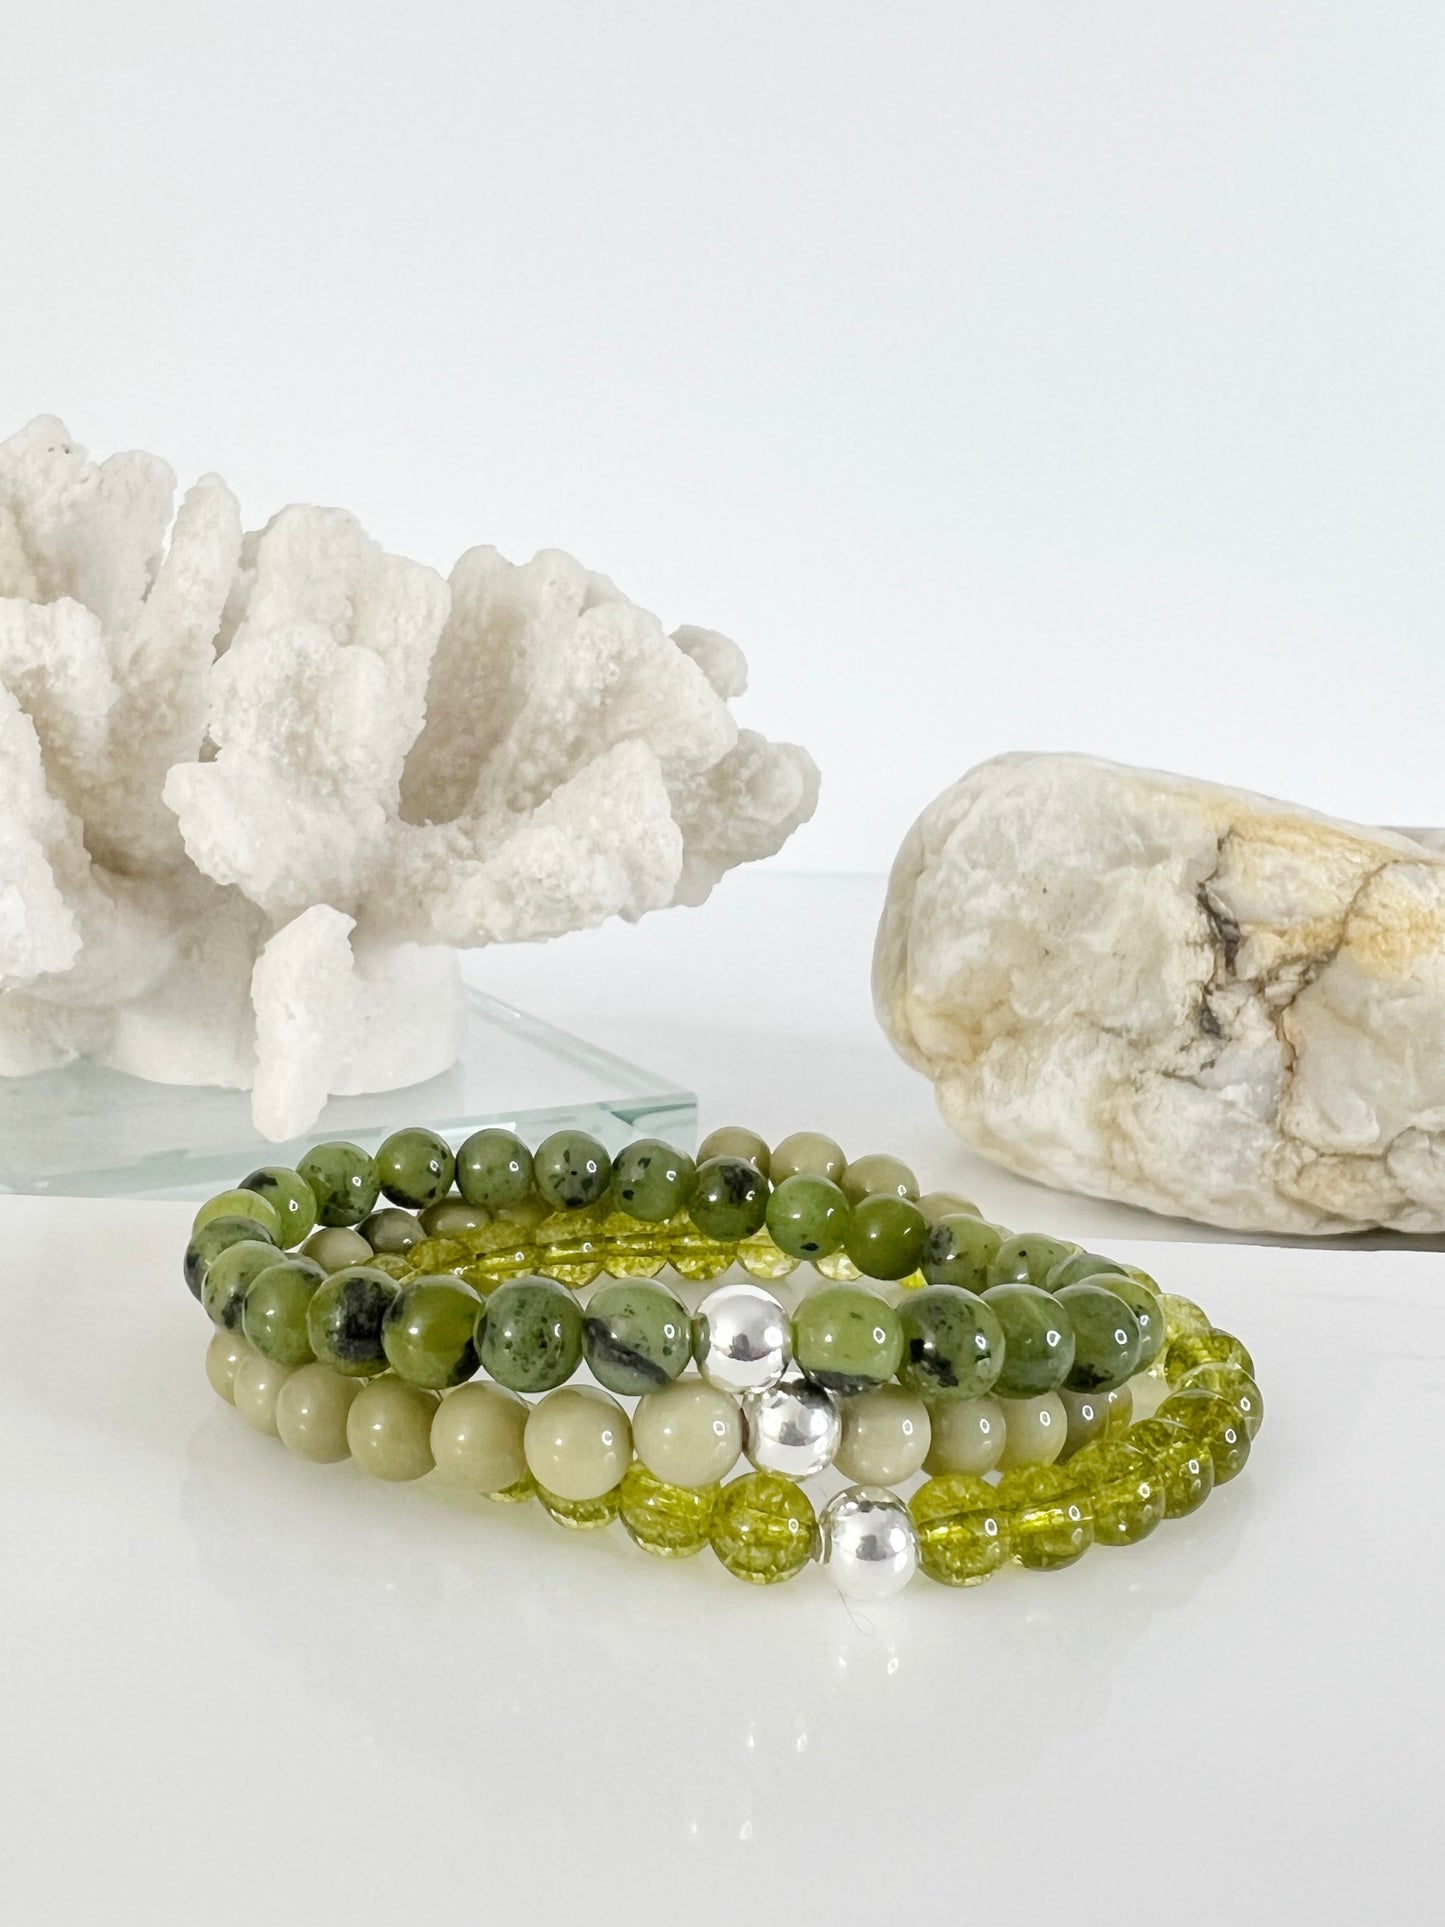 Green bracelet stack. 3 stretch bracelet, Canadian Jade, Avocado Jasper and Peridot. Each one with one sterling silver bead. There's a white coral and a brownish rock behind the stack. The bracelets are stacked on top of each other.